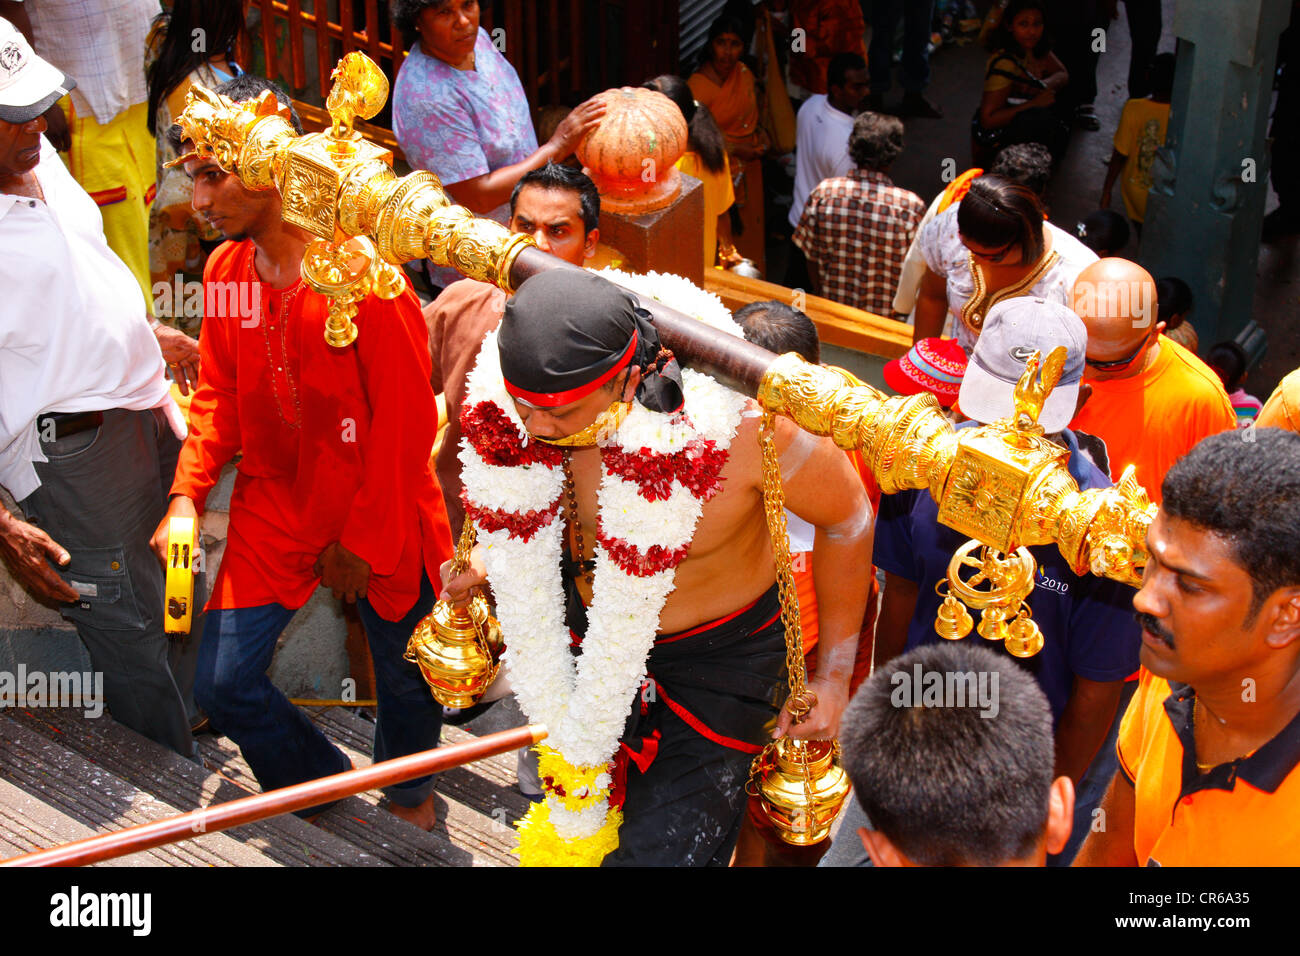 Holy man with sealed mouth and load on his shoulders, Hindu festival Thaipusam, Batu Caves limestone caves and temples Stock Photo